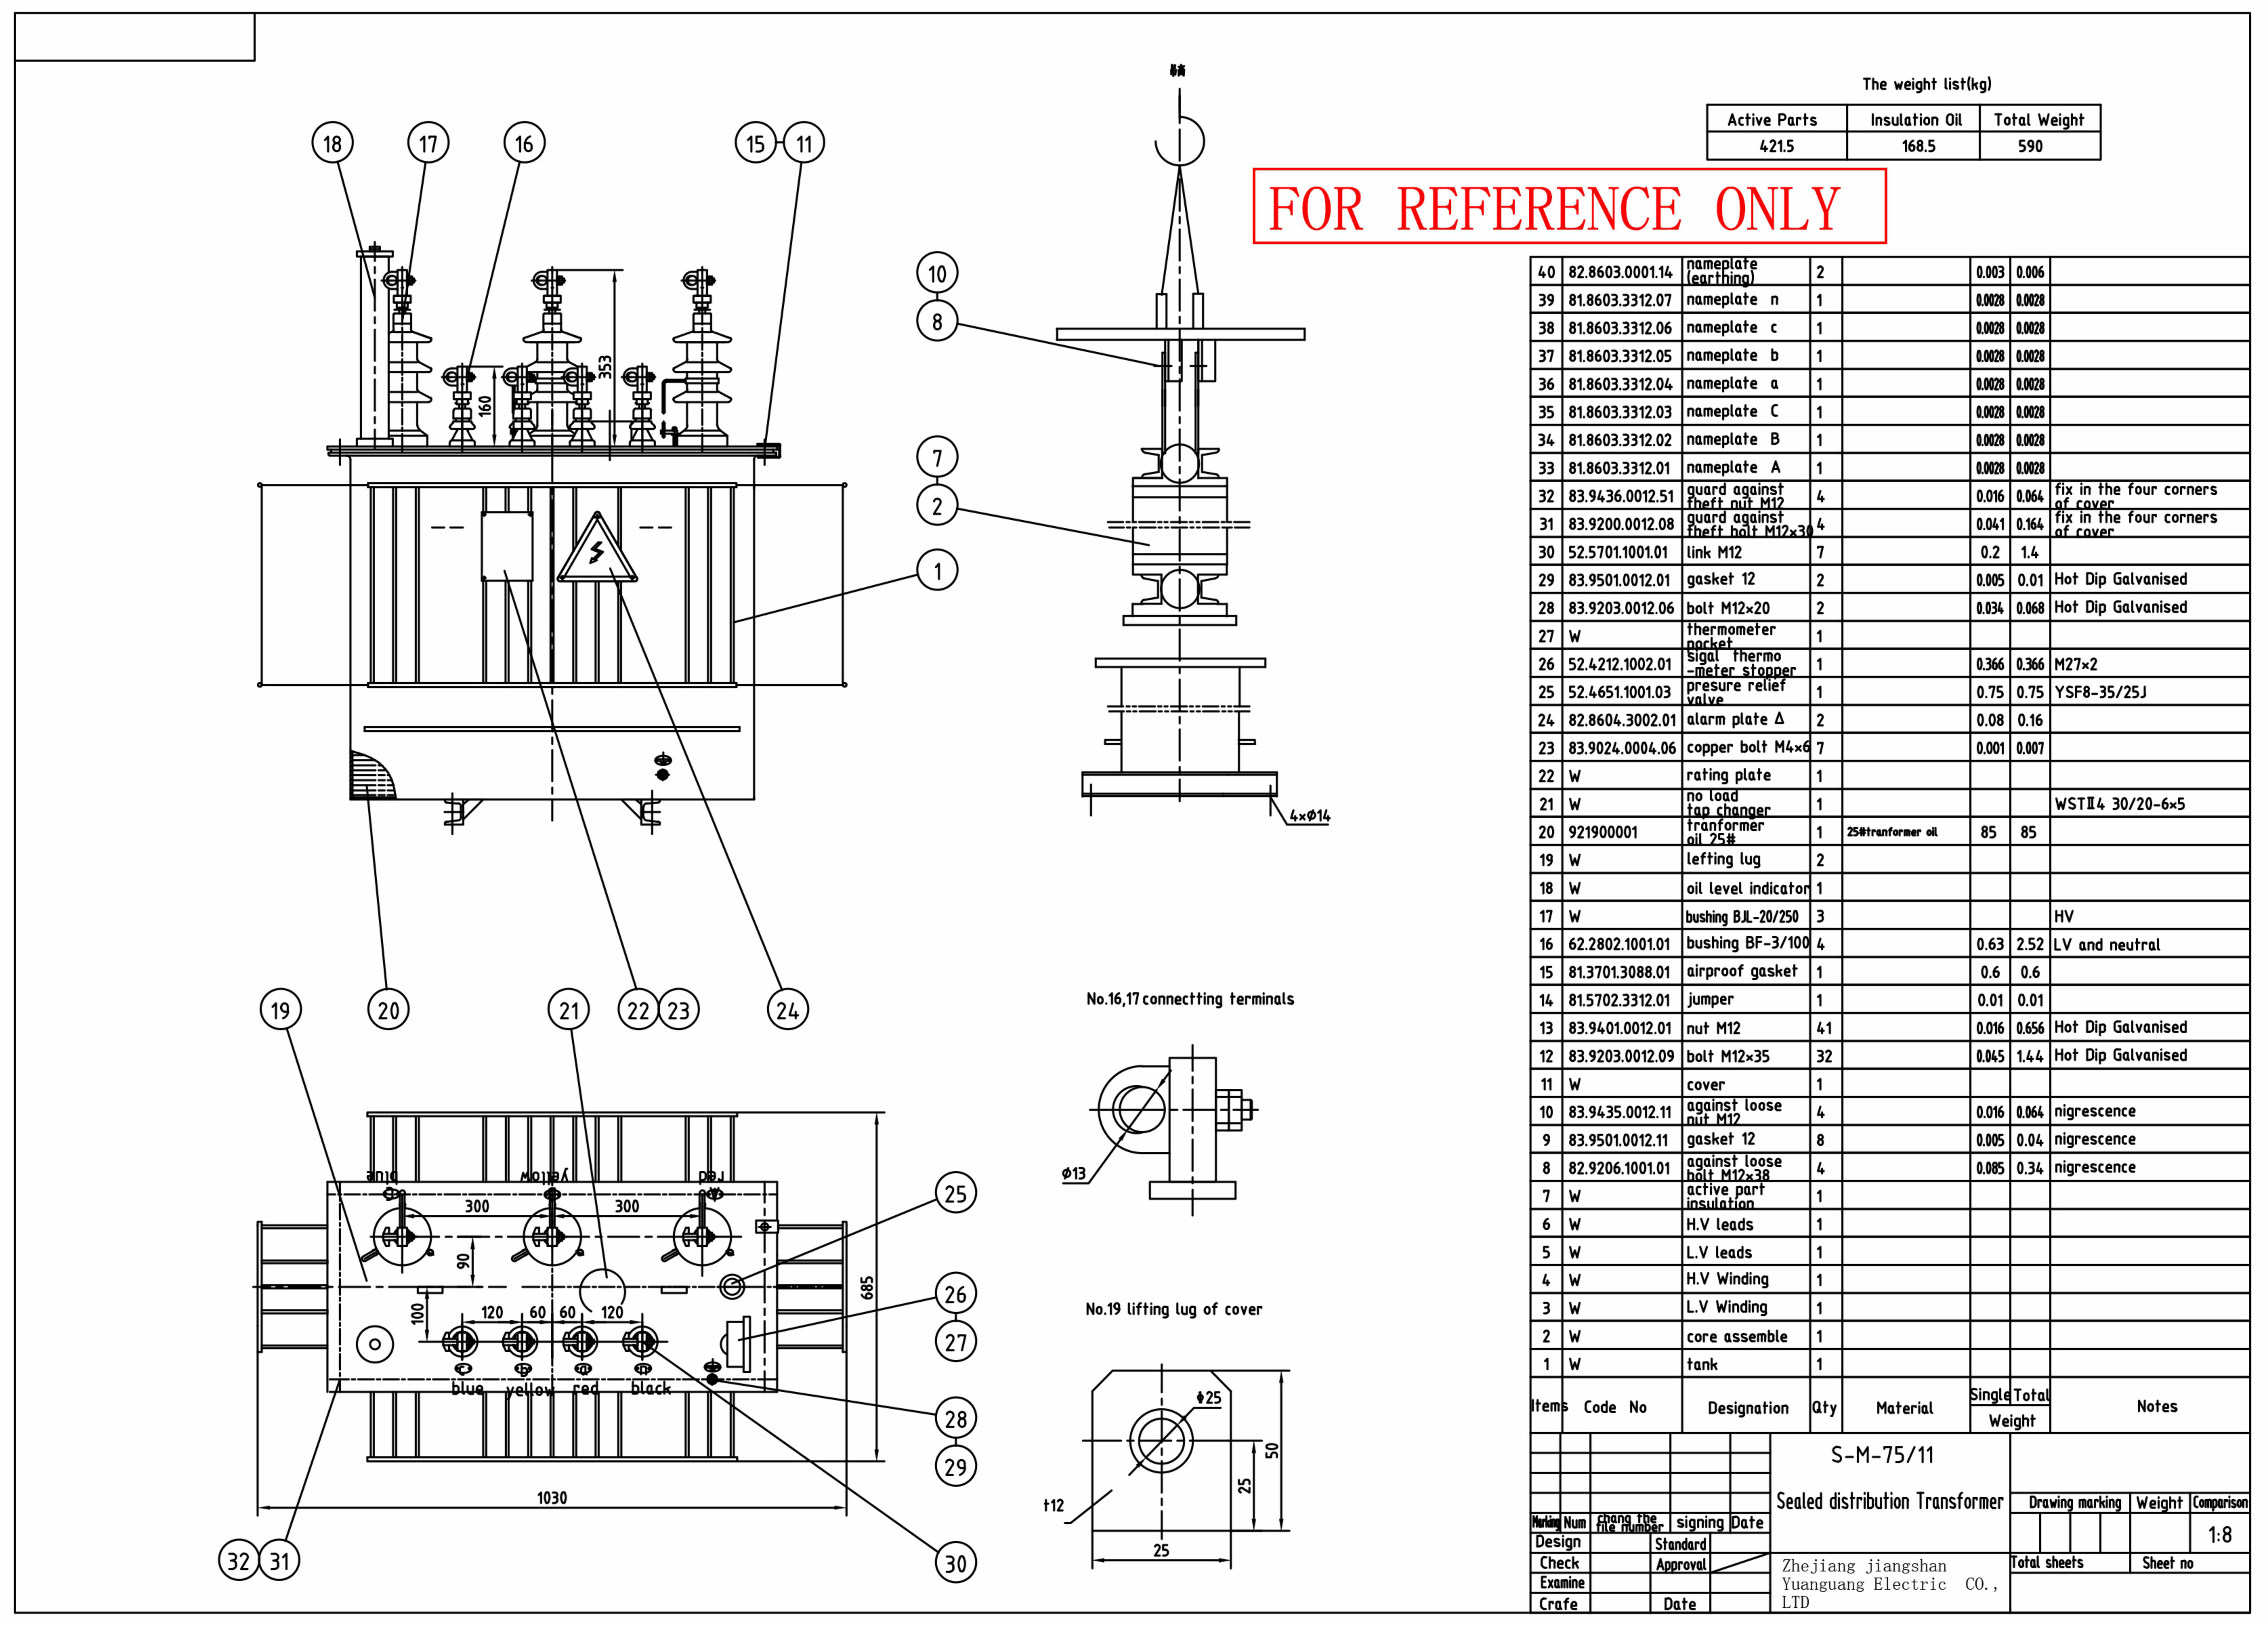 Oil Filled Hermetically Sealed Three Phase Pole Mounted Distribution Transformer